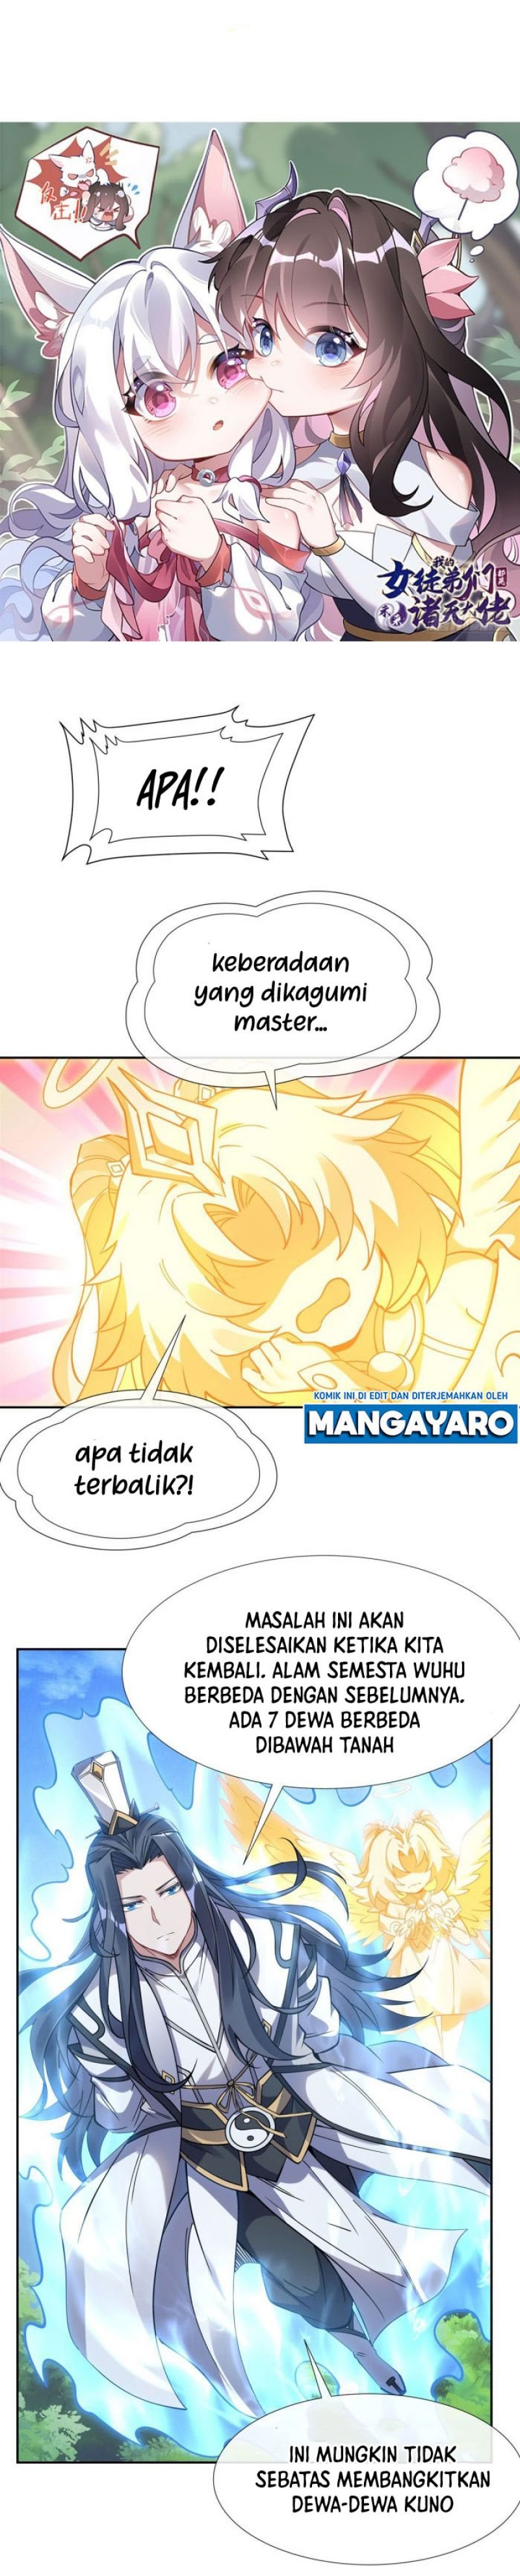 Dilarang COPAS - situs resmi www.mangacanblog.com - Komik my female apprentices are all big shots from the future 135 - chapter 135 136 Indonesia my female apprentices are all big shots from the future 135 - chapter 135 Terbaru 4|Baca Manga Komik Indonesia|Mangacan